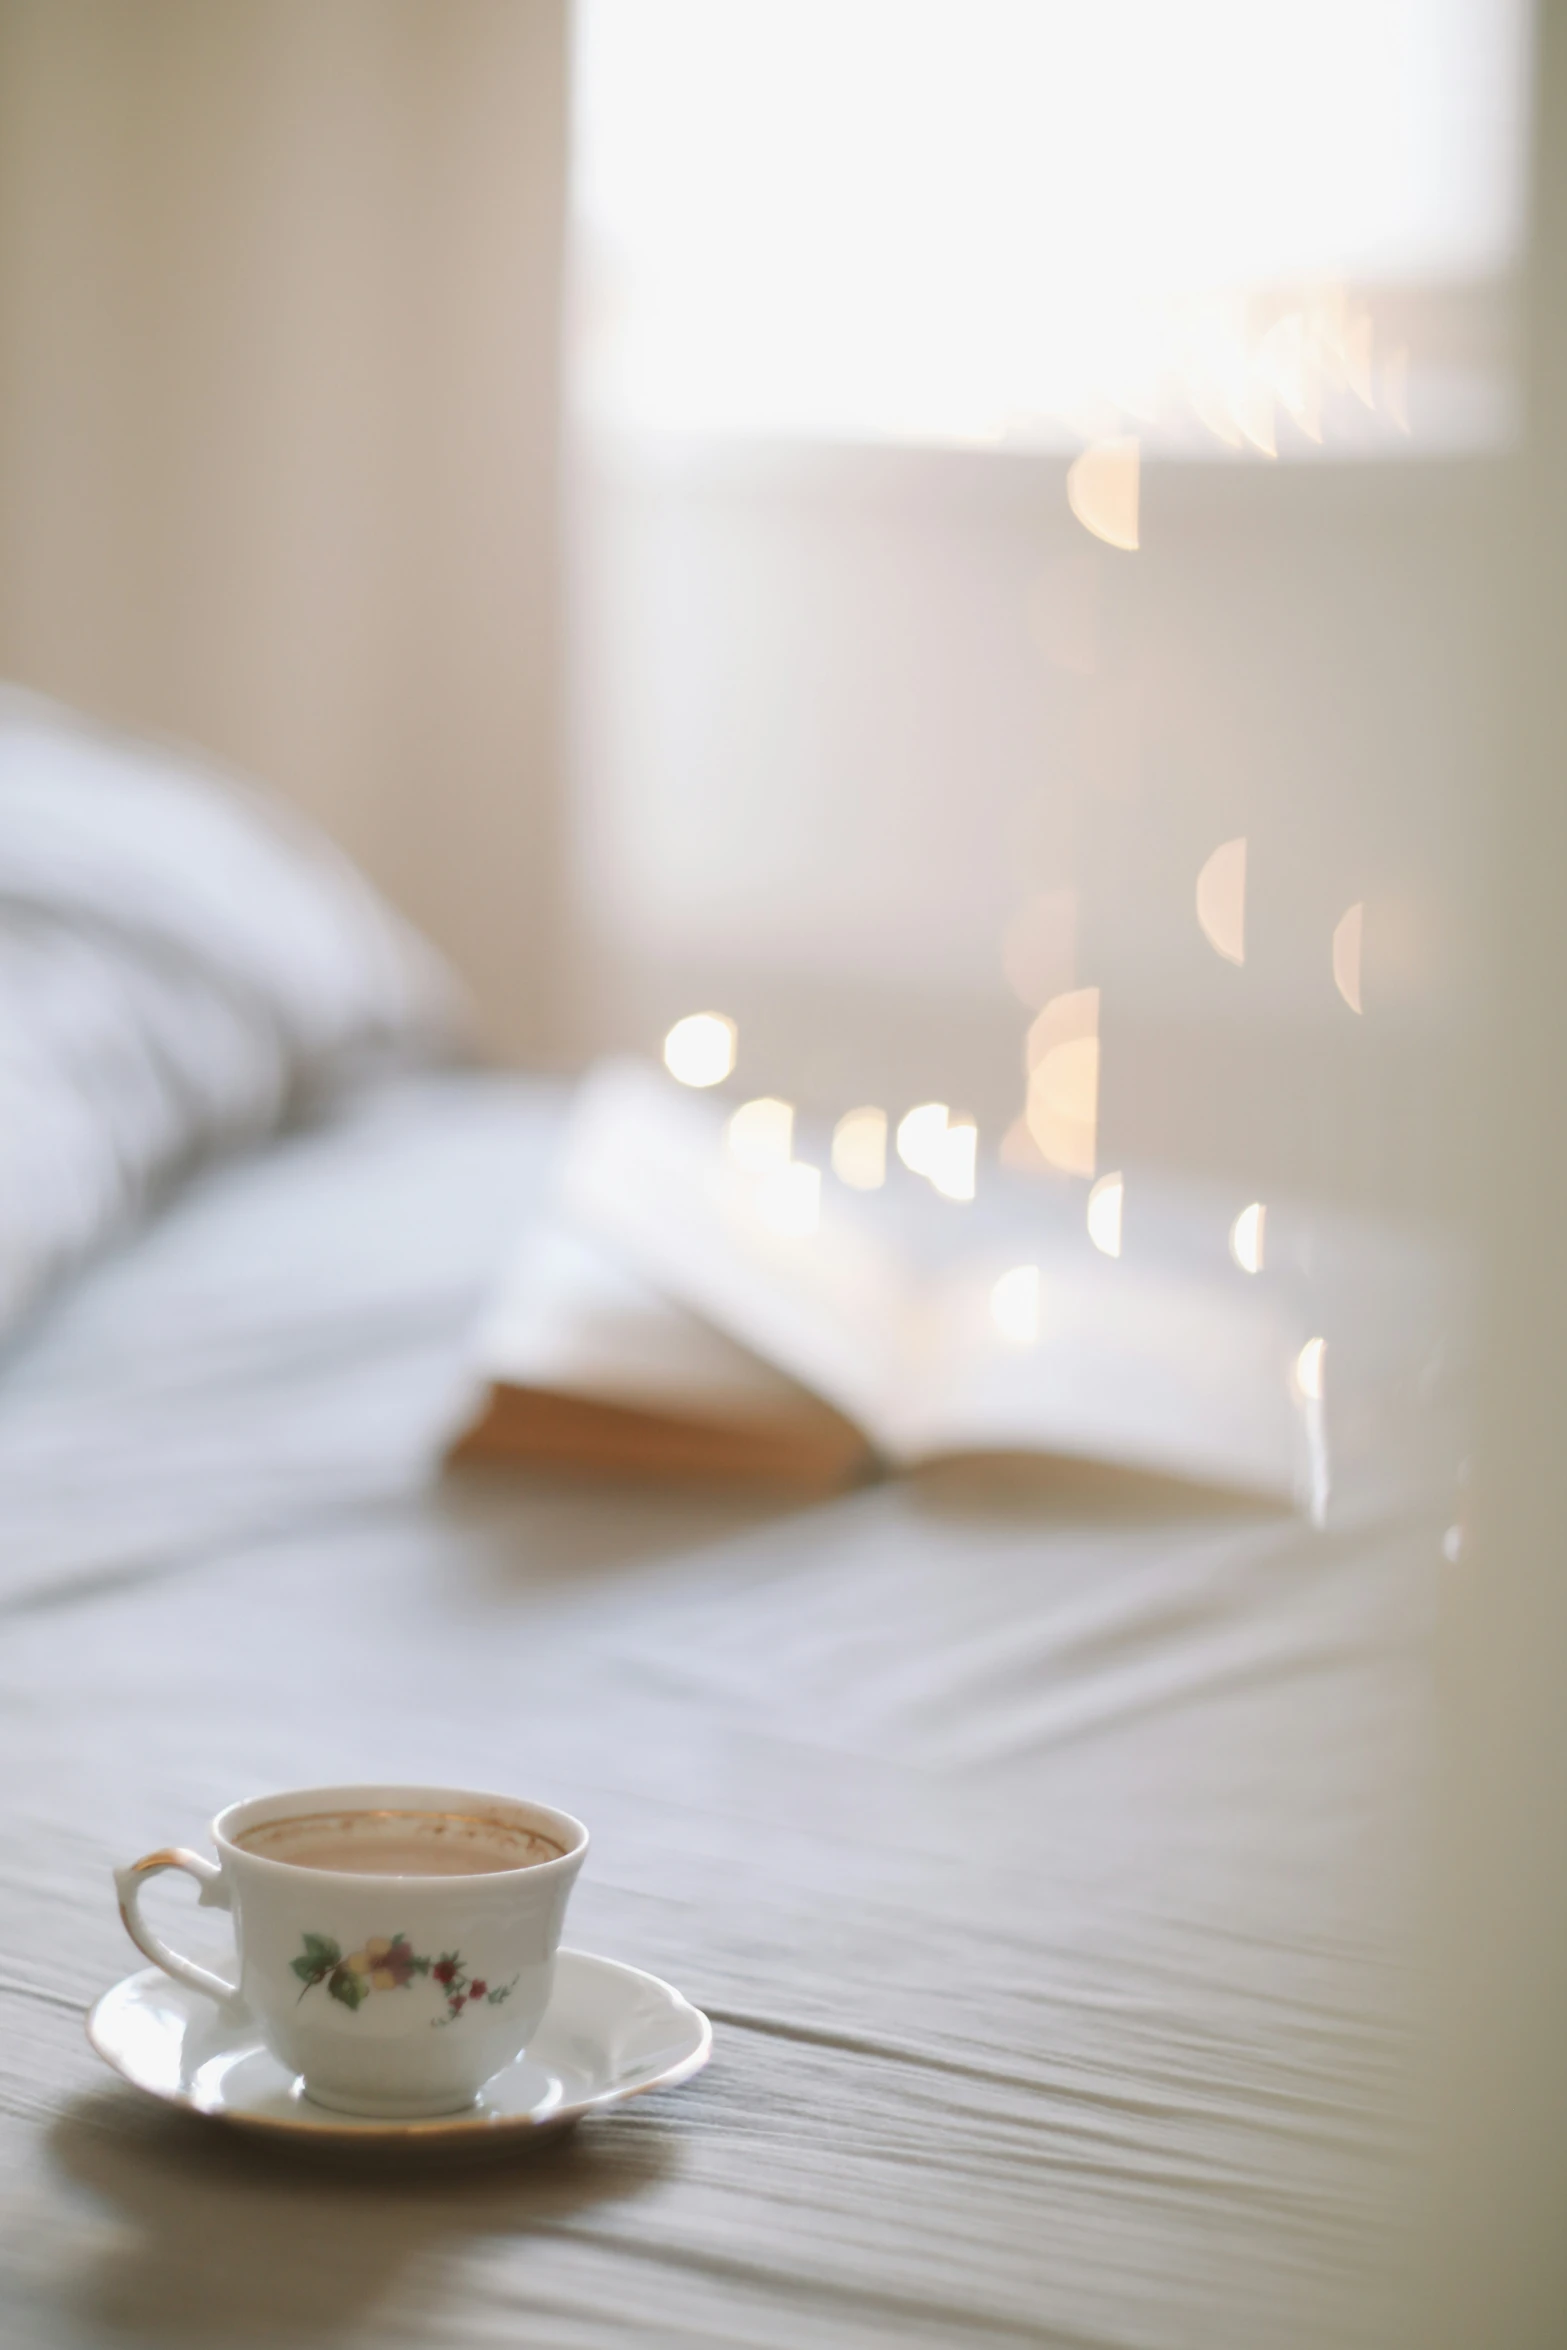 coffee cup on a bed with sunlight streaming through the window